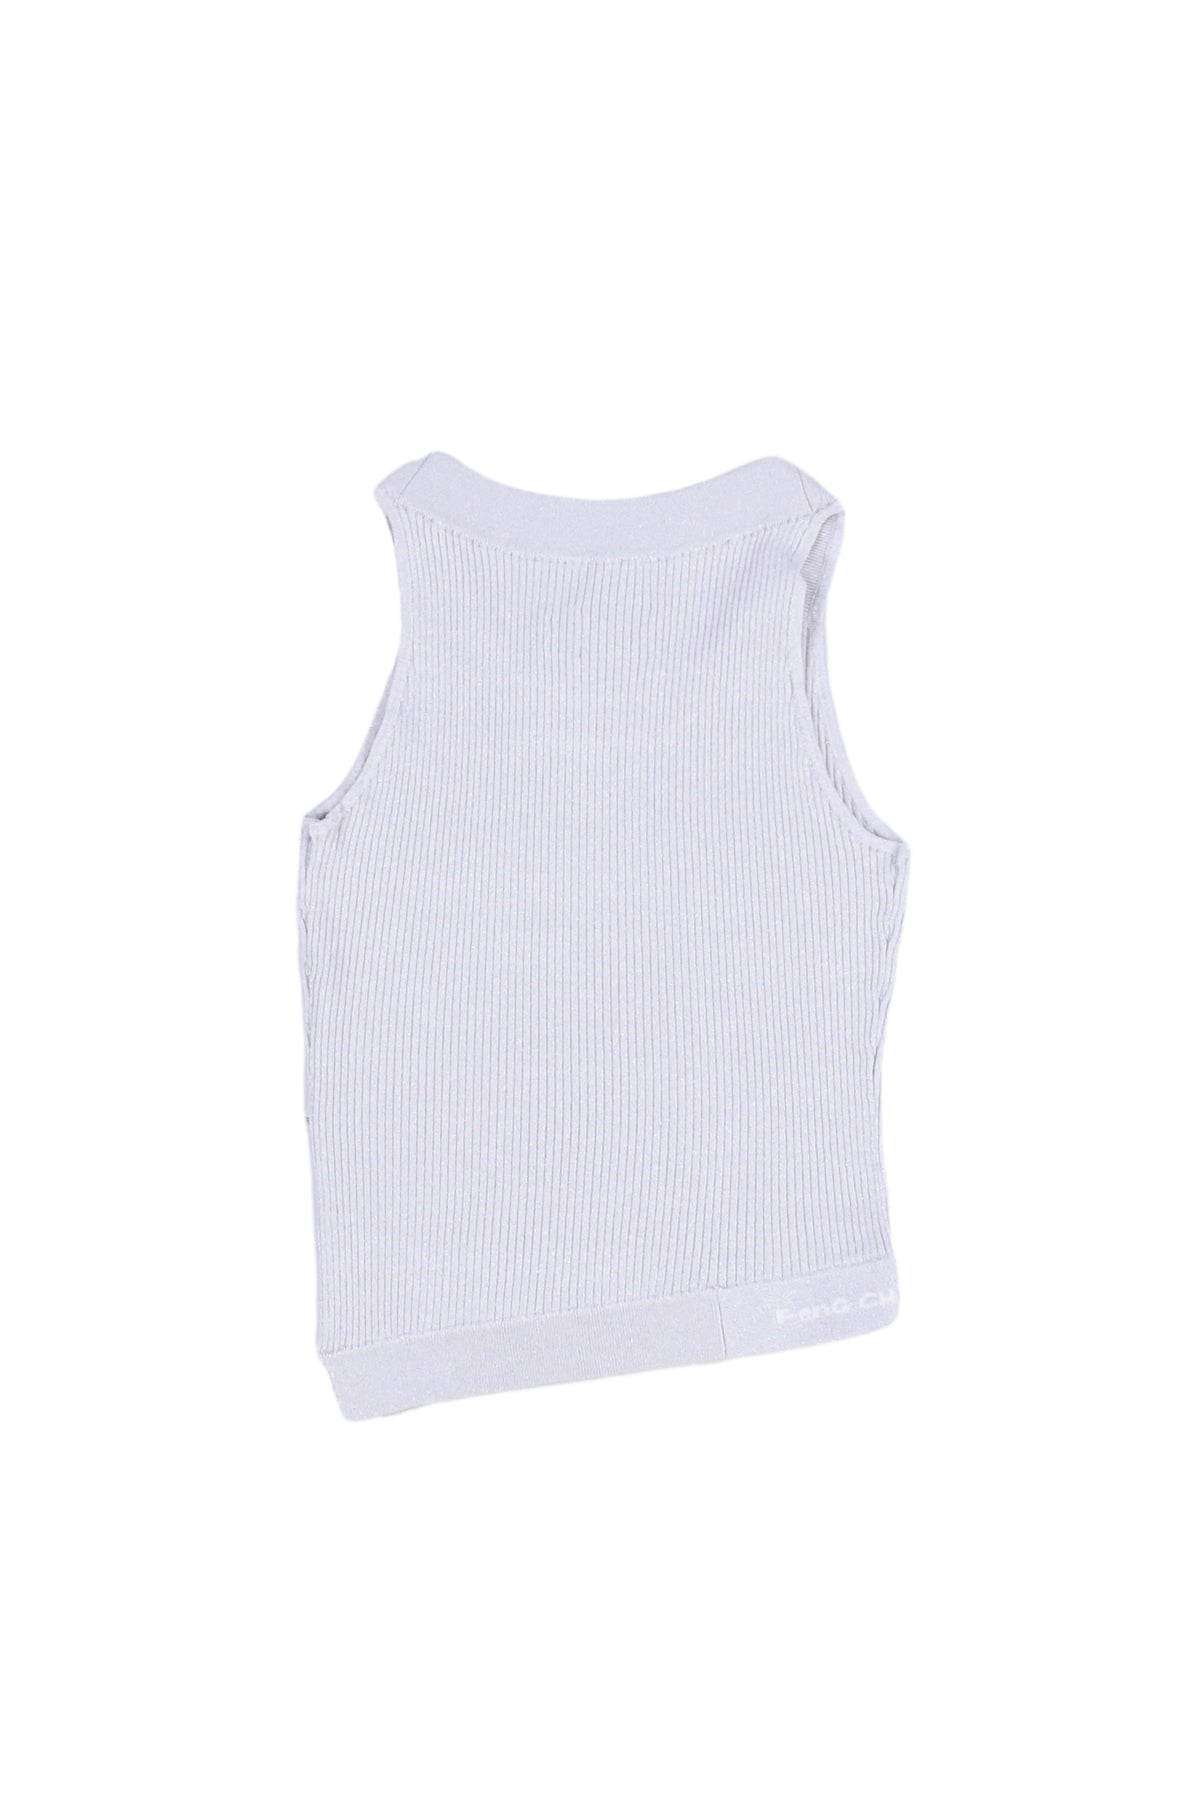 KNITTED TANK TOP / SIL